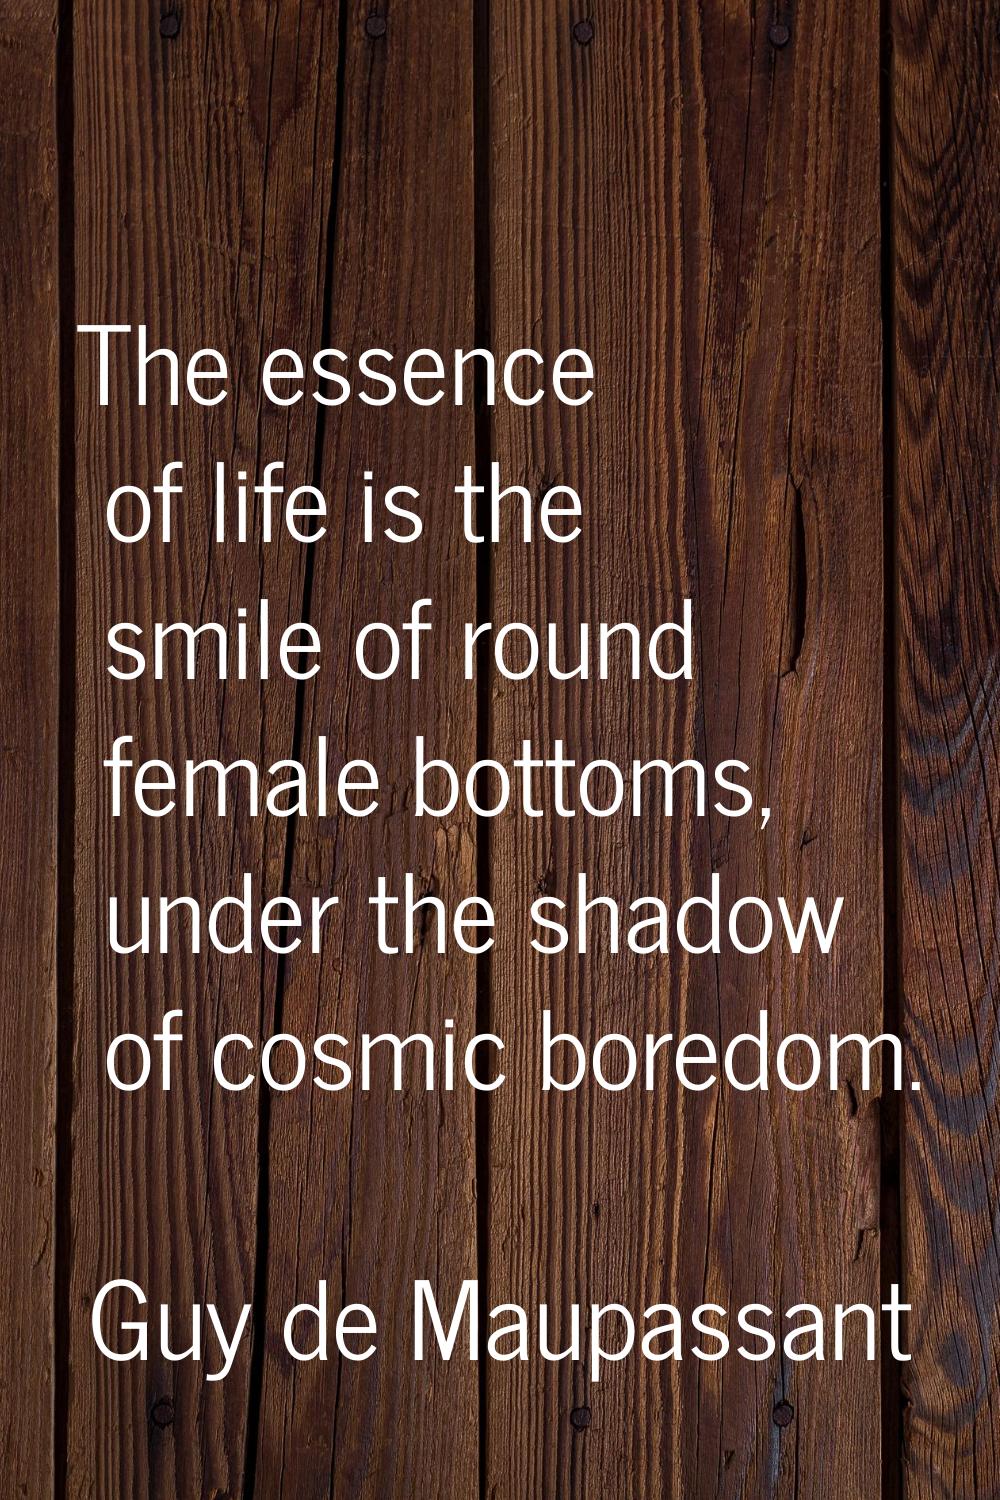 The essence of life is the smile of round female bottoms, under the shadow of cosmic boredom.